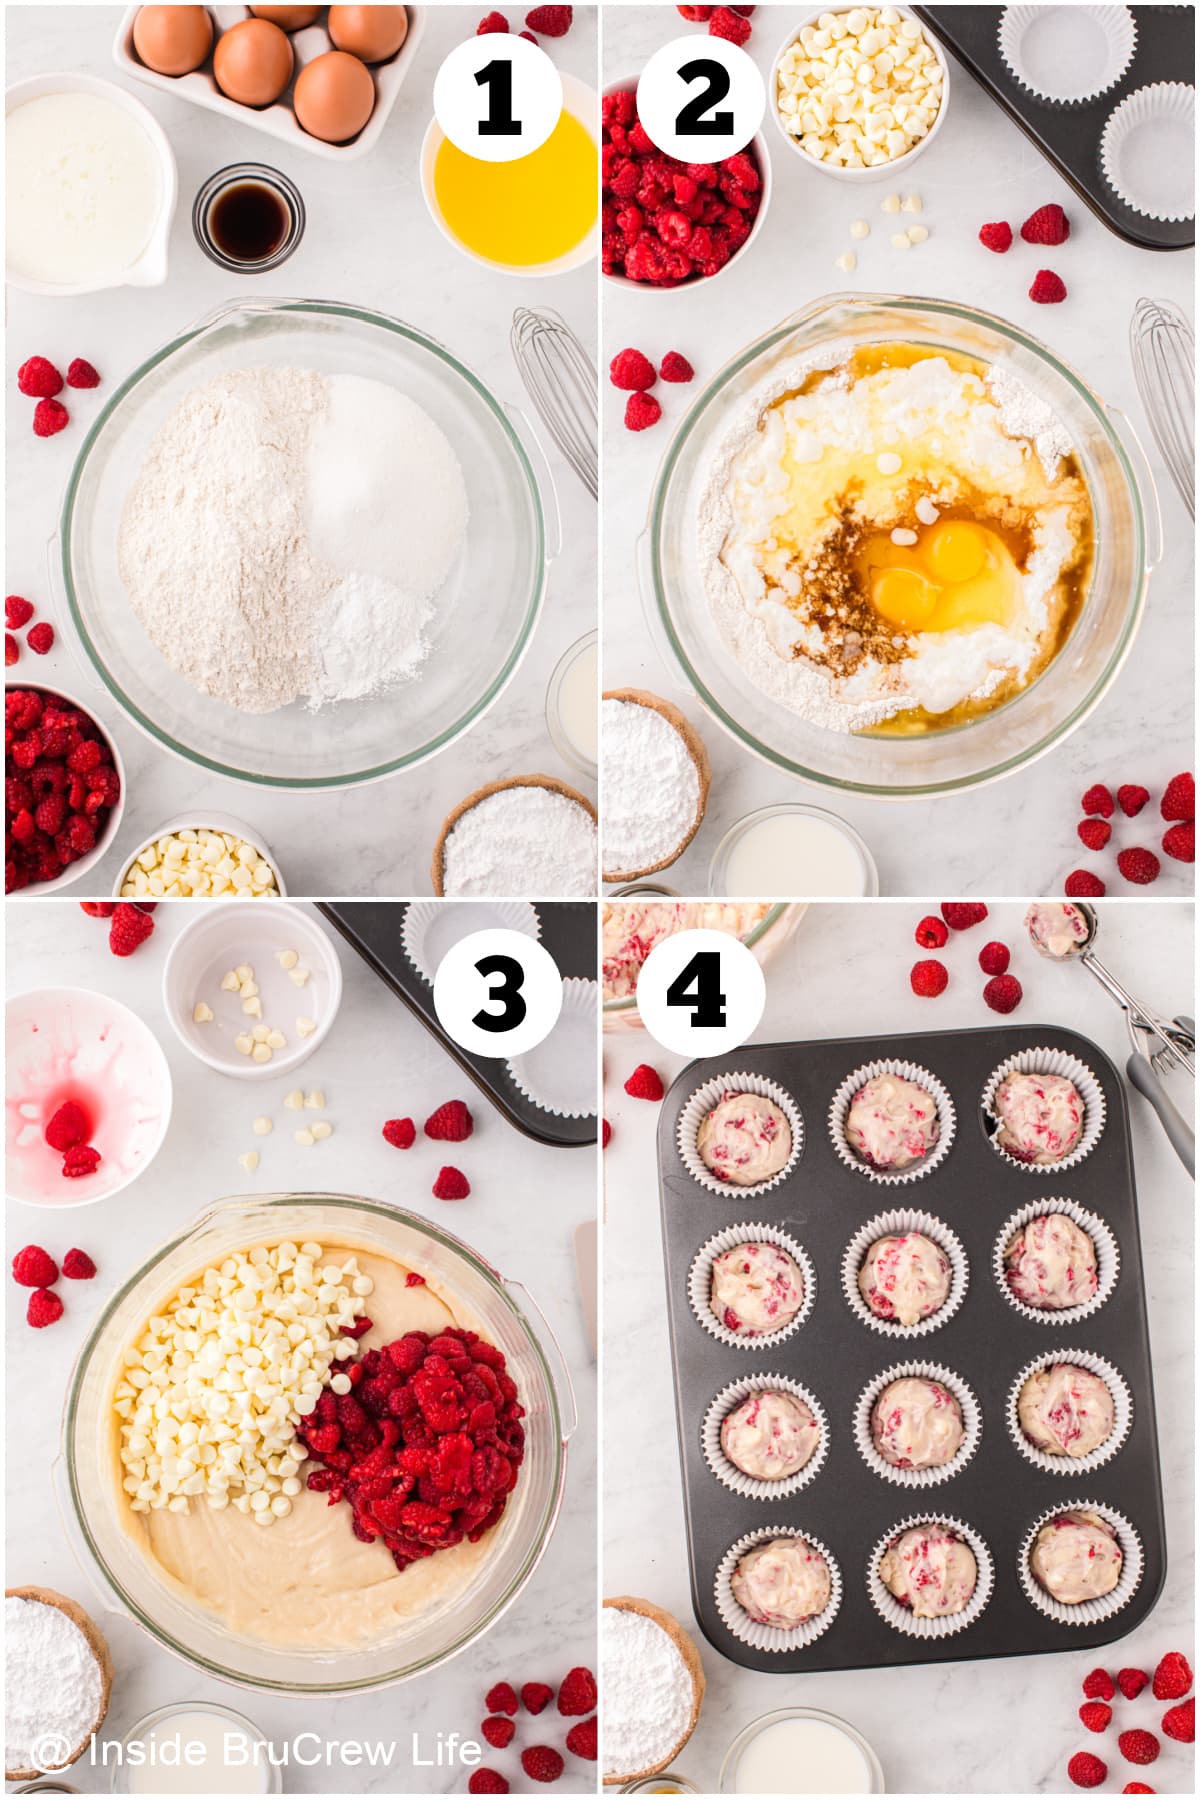 Four pictures collaged together showing how to make fruit muffins.